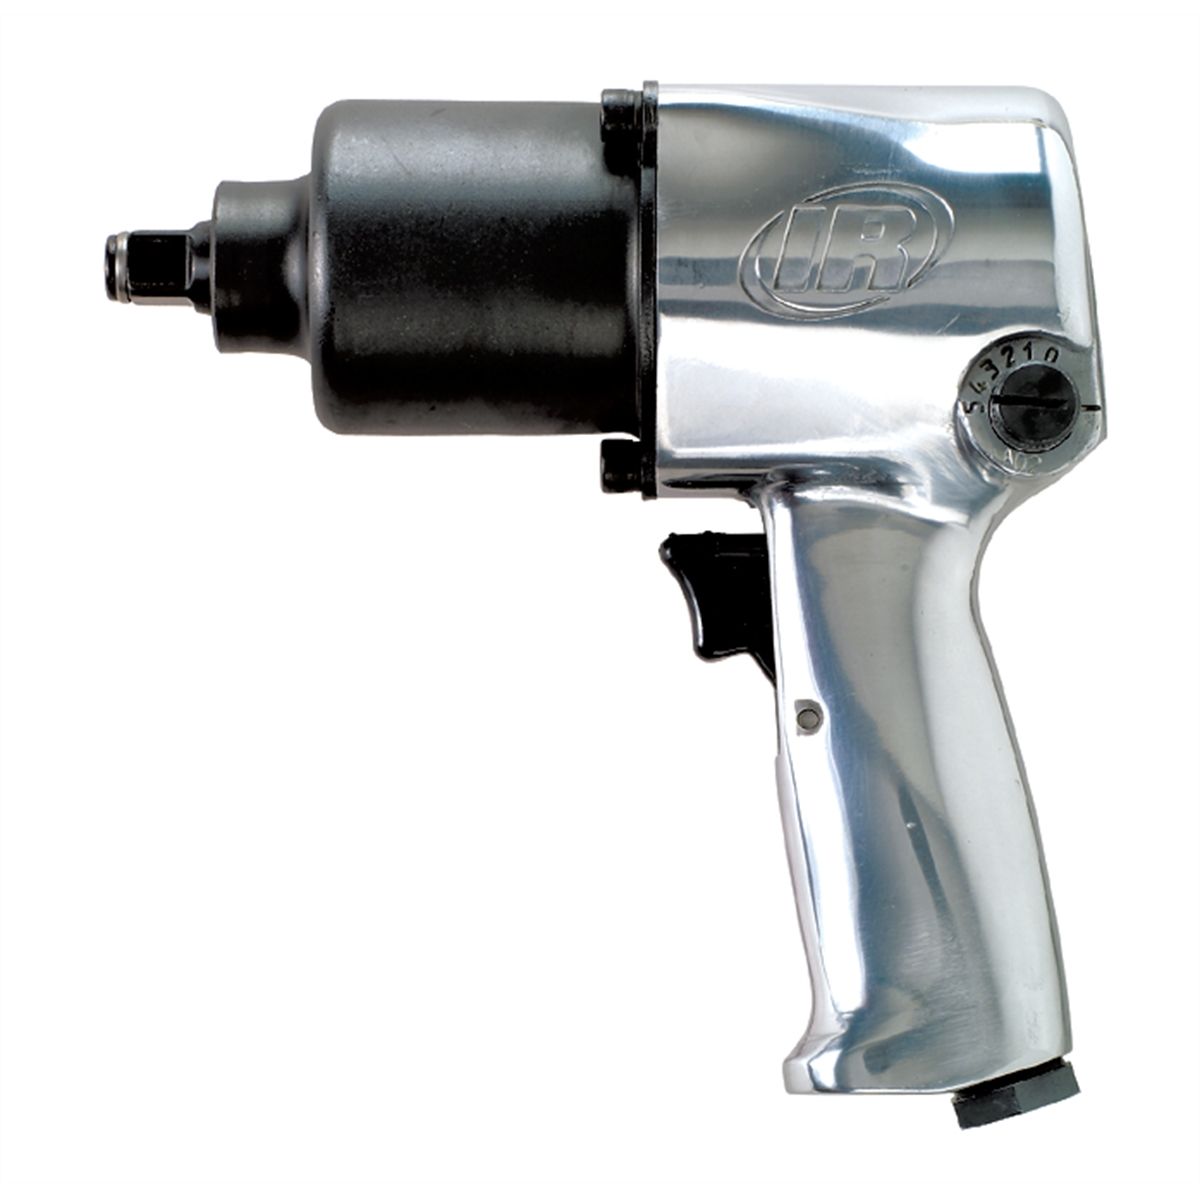 1/2 Inch Drive Super Duty Air Impact Wrench - 425 ft-lbsIRT231C